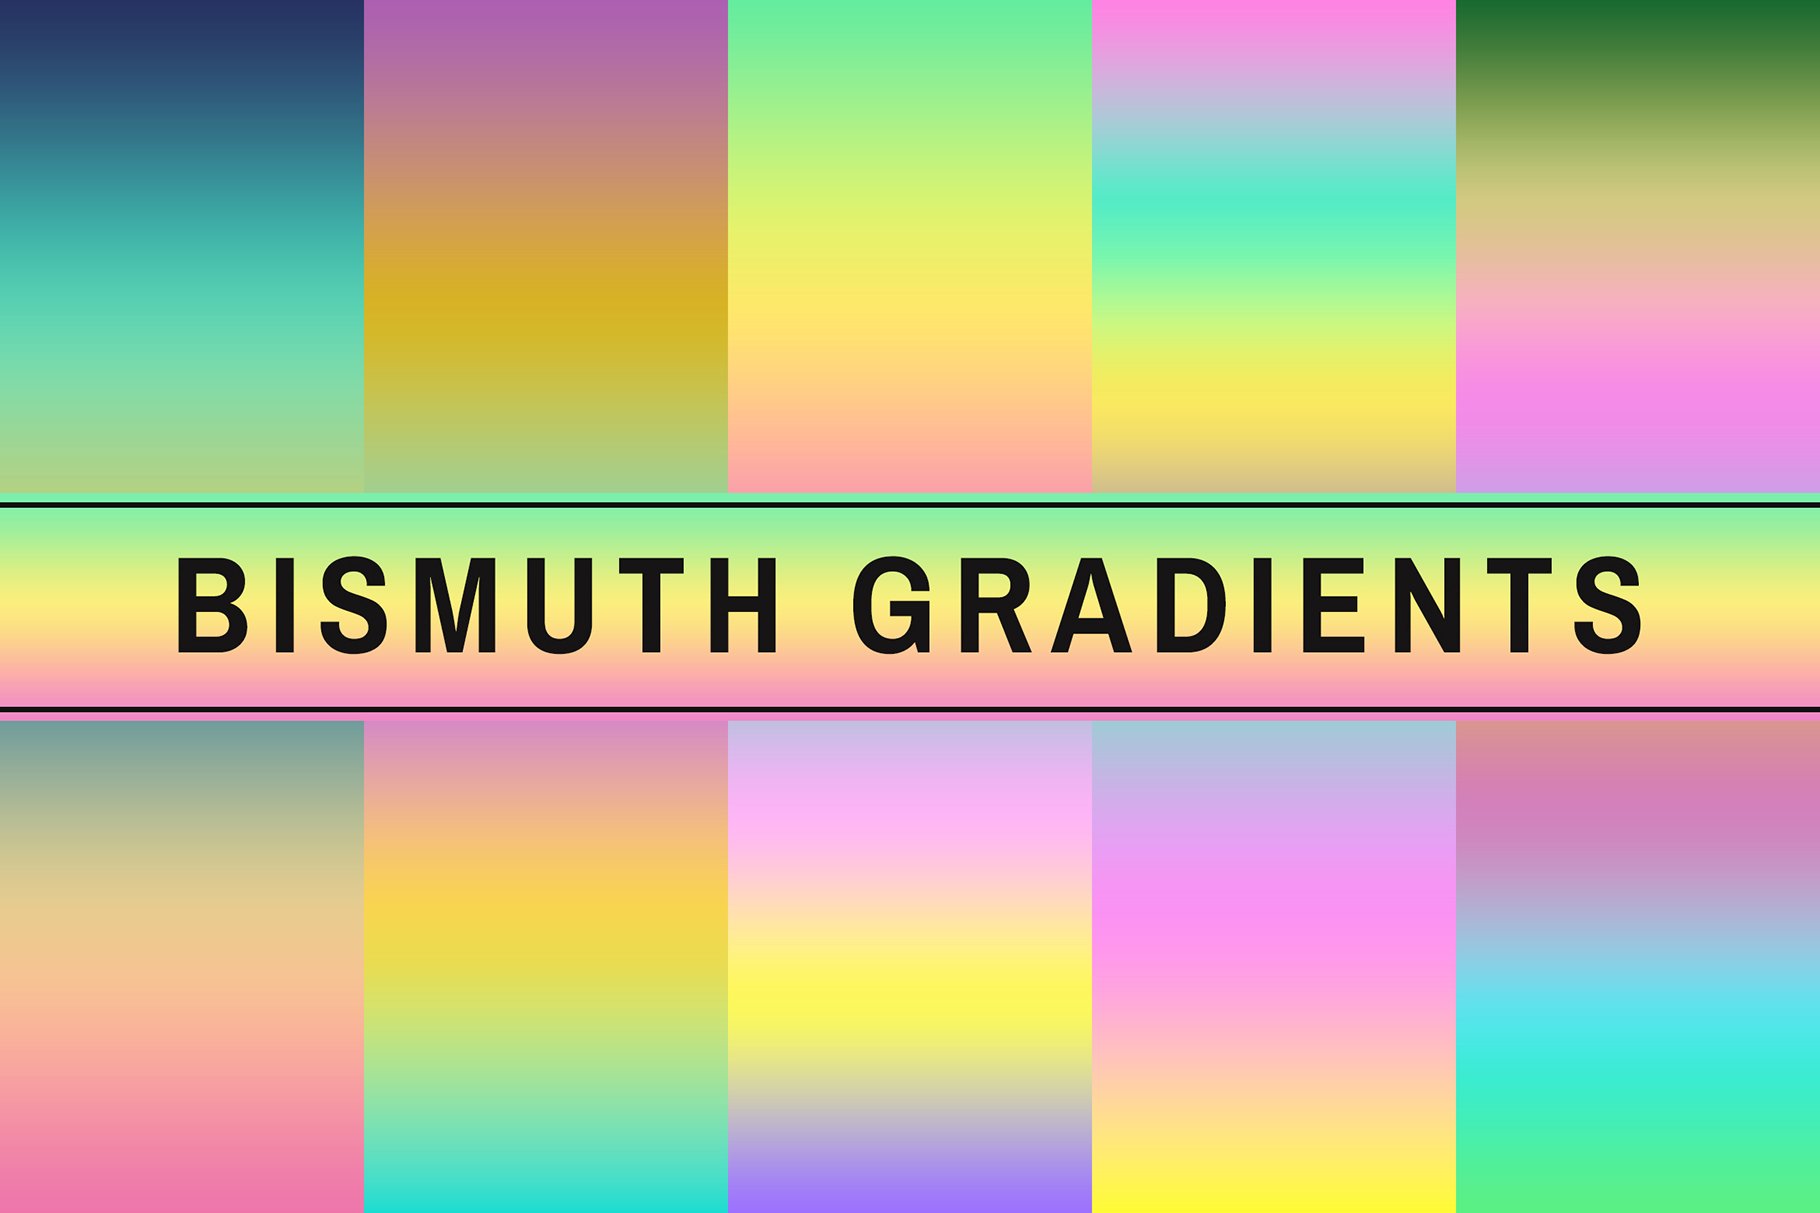 Bismuth Gradients cover image.